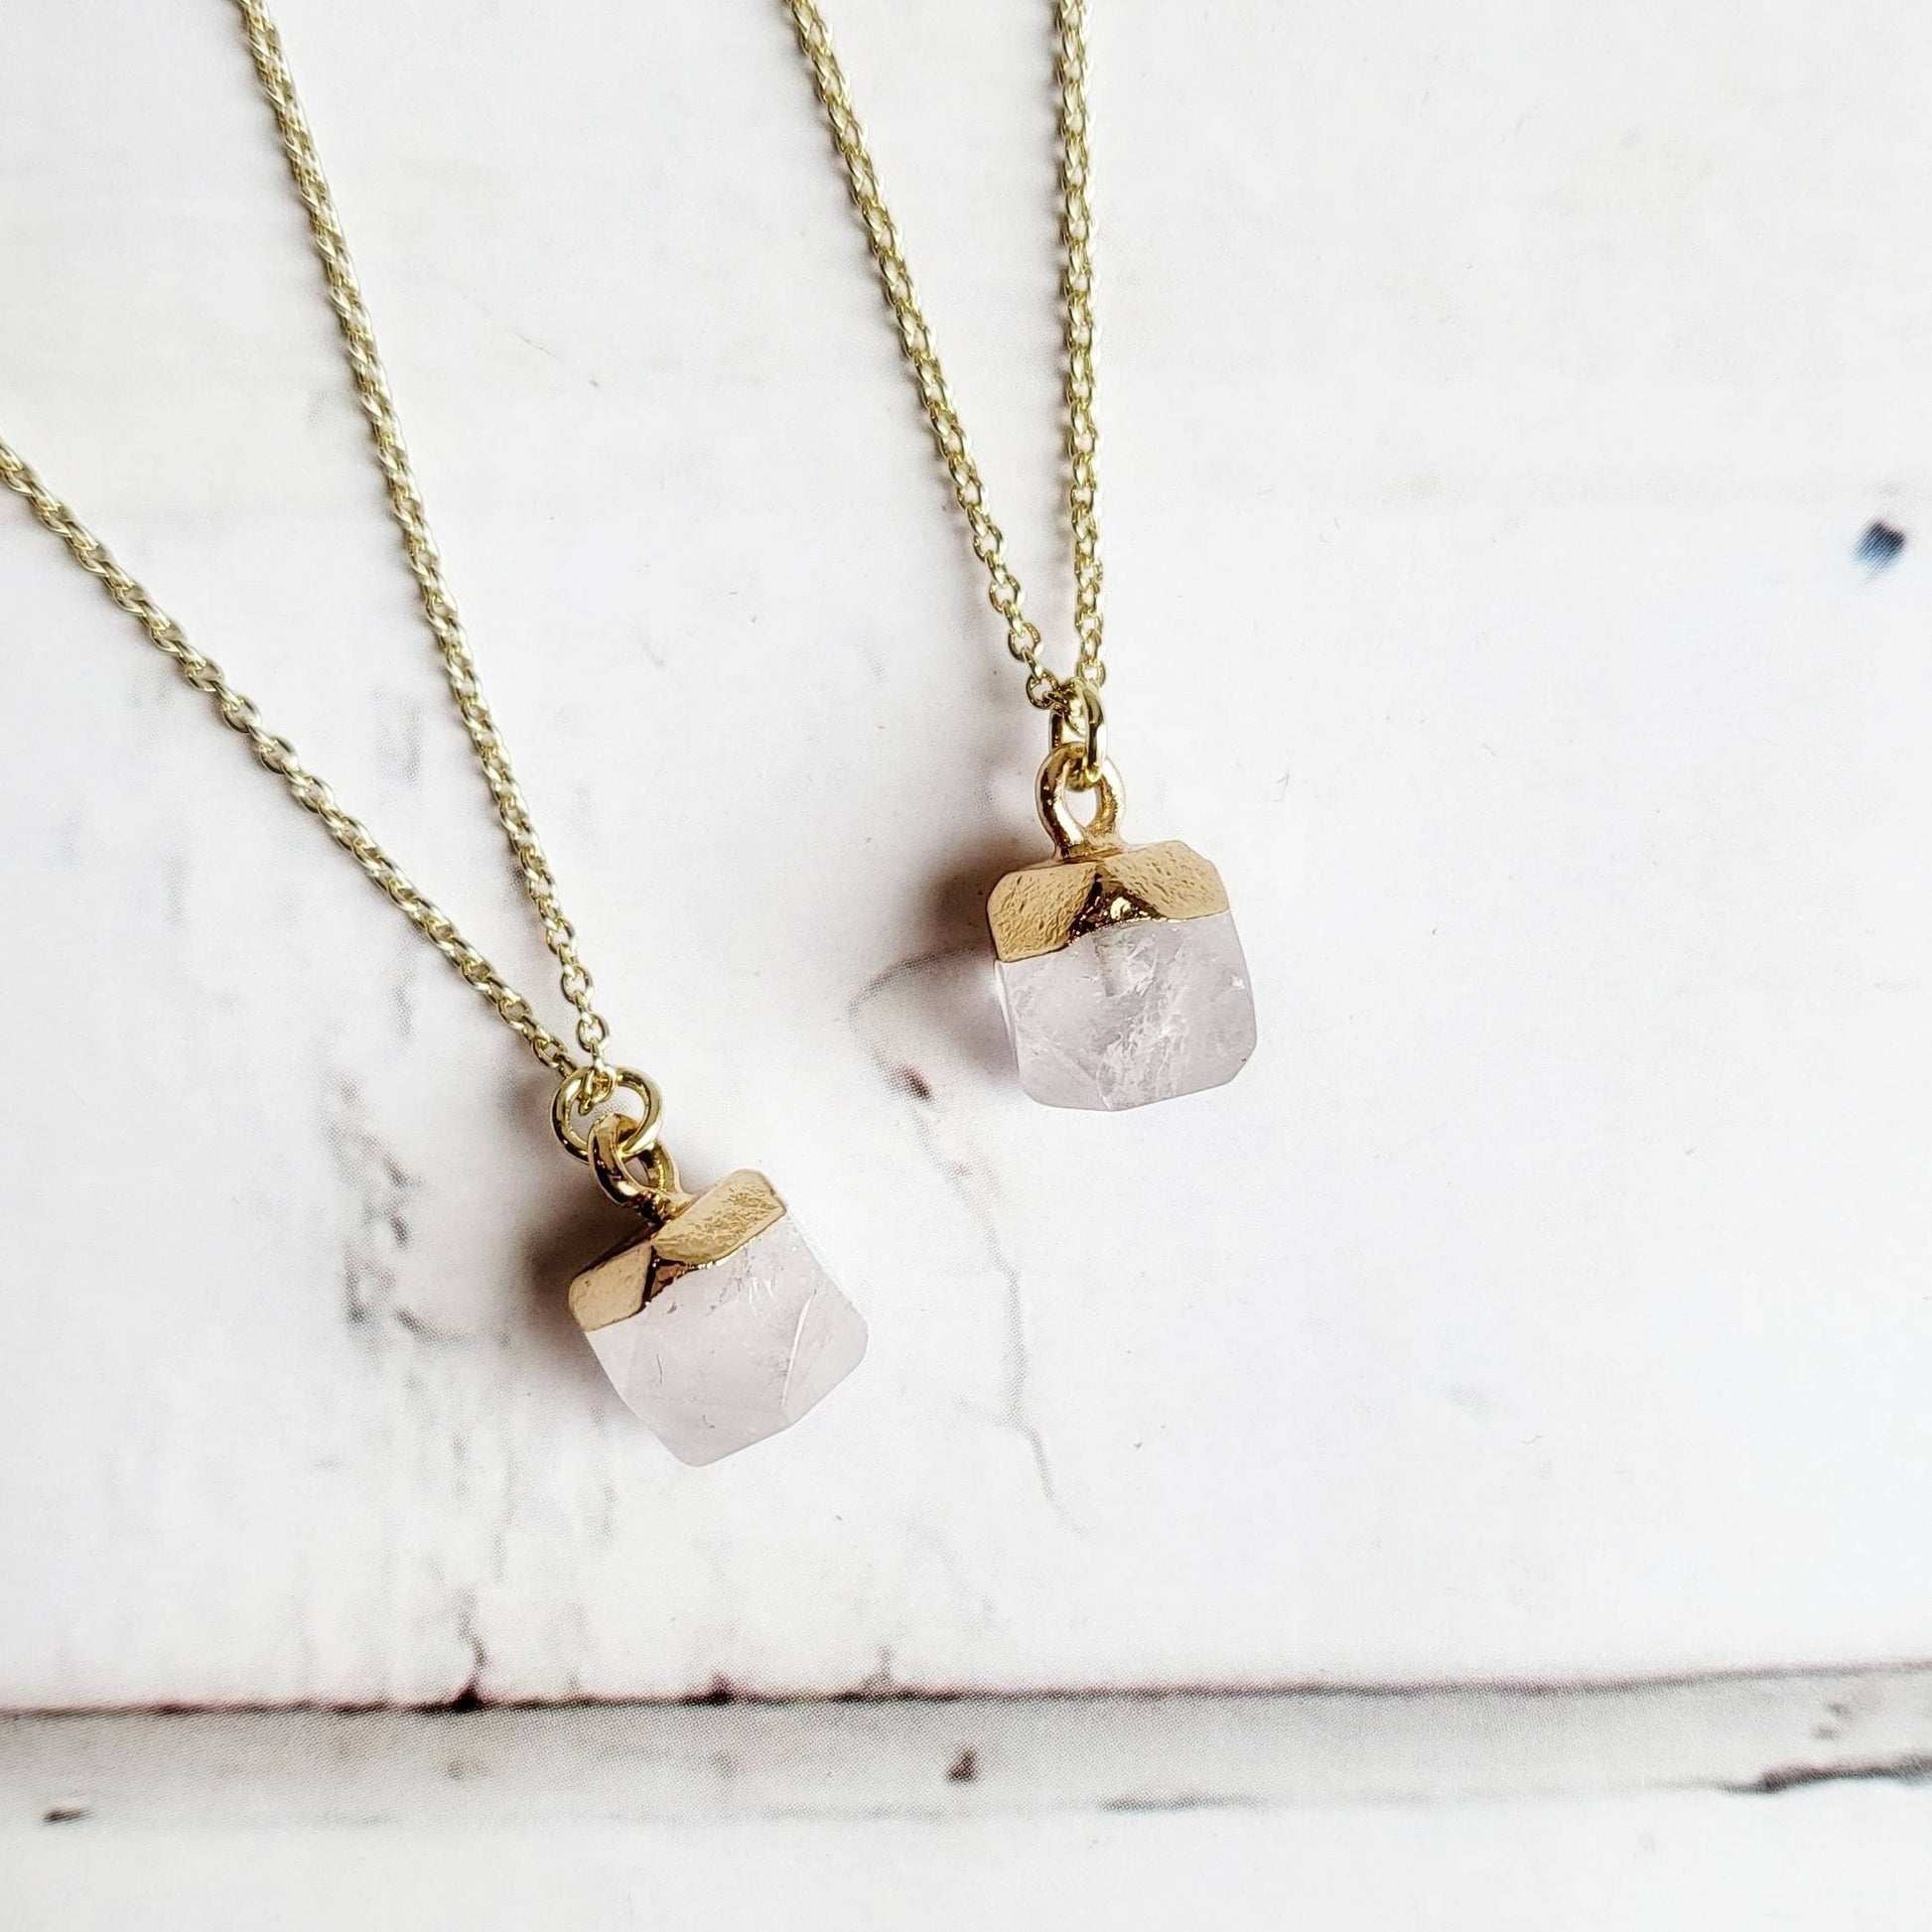 CLEAR QUARTZ | 14K Gold Dainty Gemstone Necklace | Crystal for Clarity, Harmony, Amplification | Delicate, Minimalist Manifestation Necklace